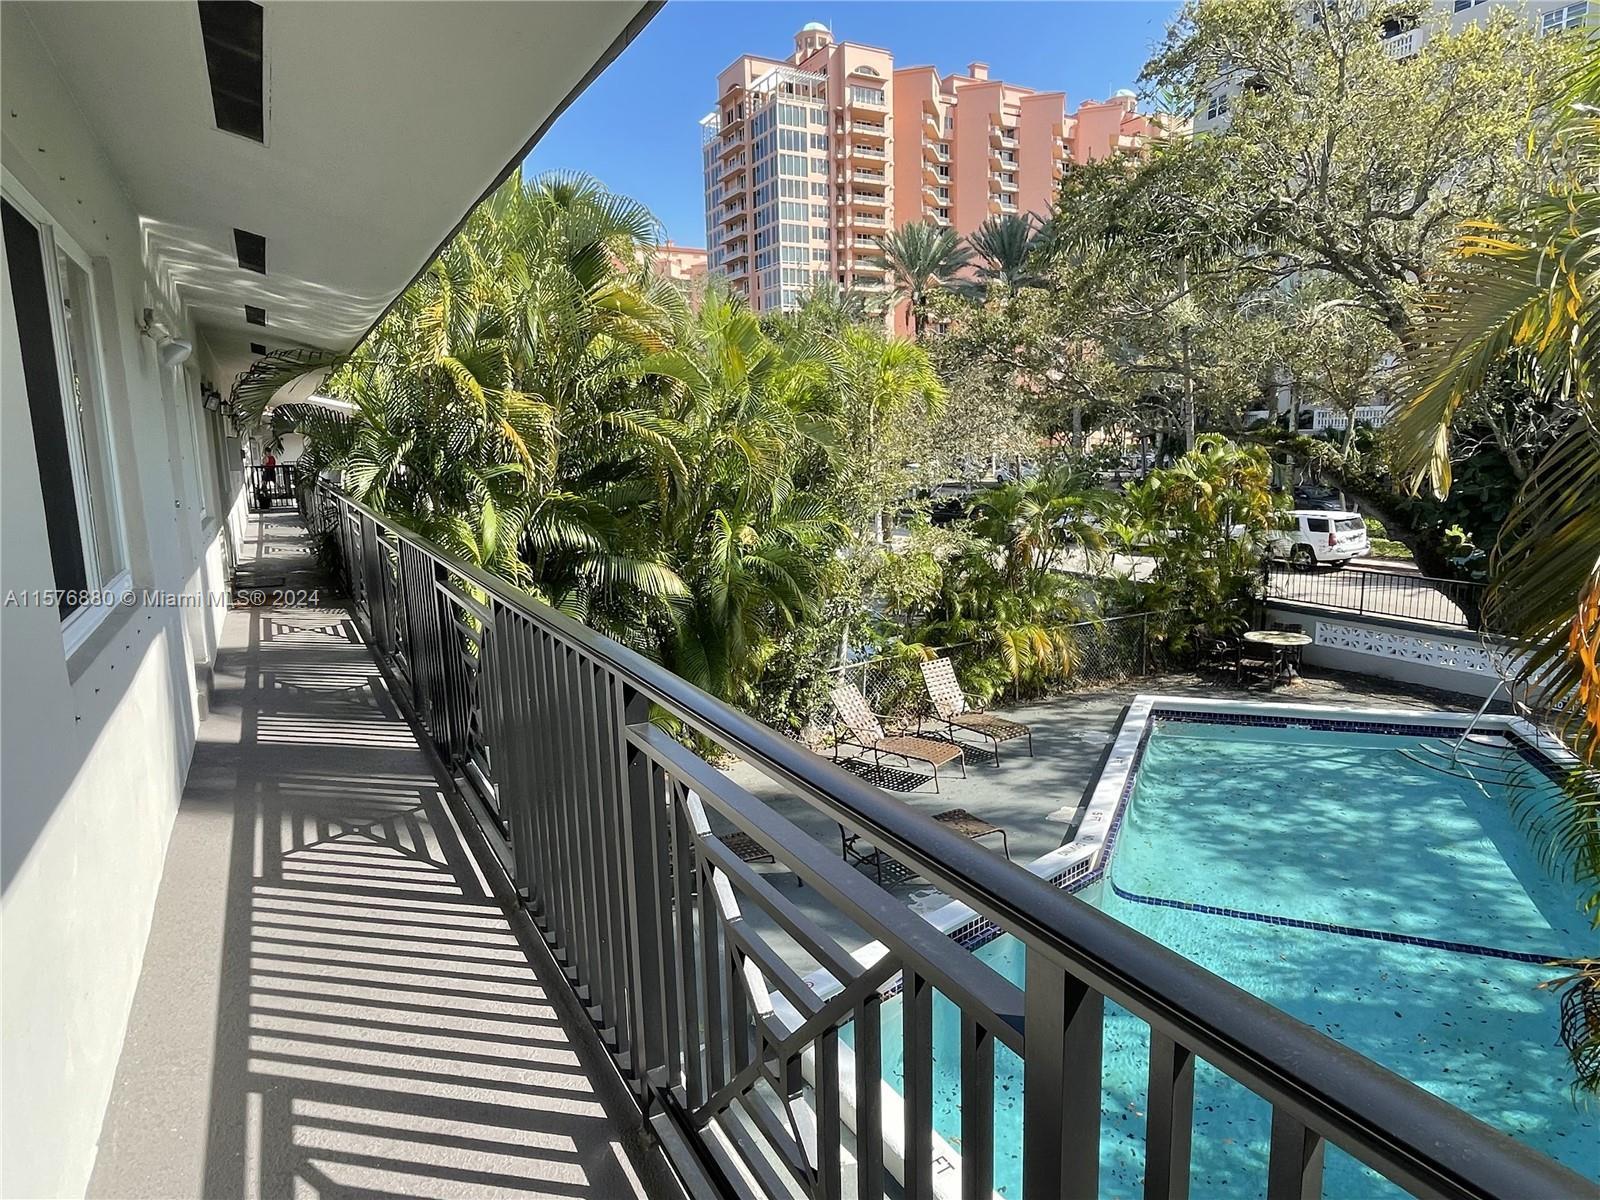 Photo of 95 Edgewater Dr #207 in Coral Gables, FL